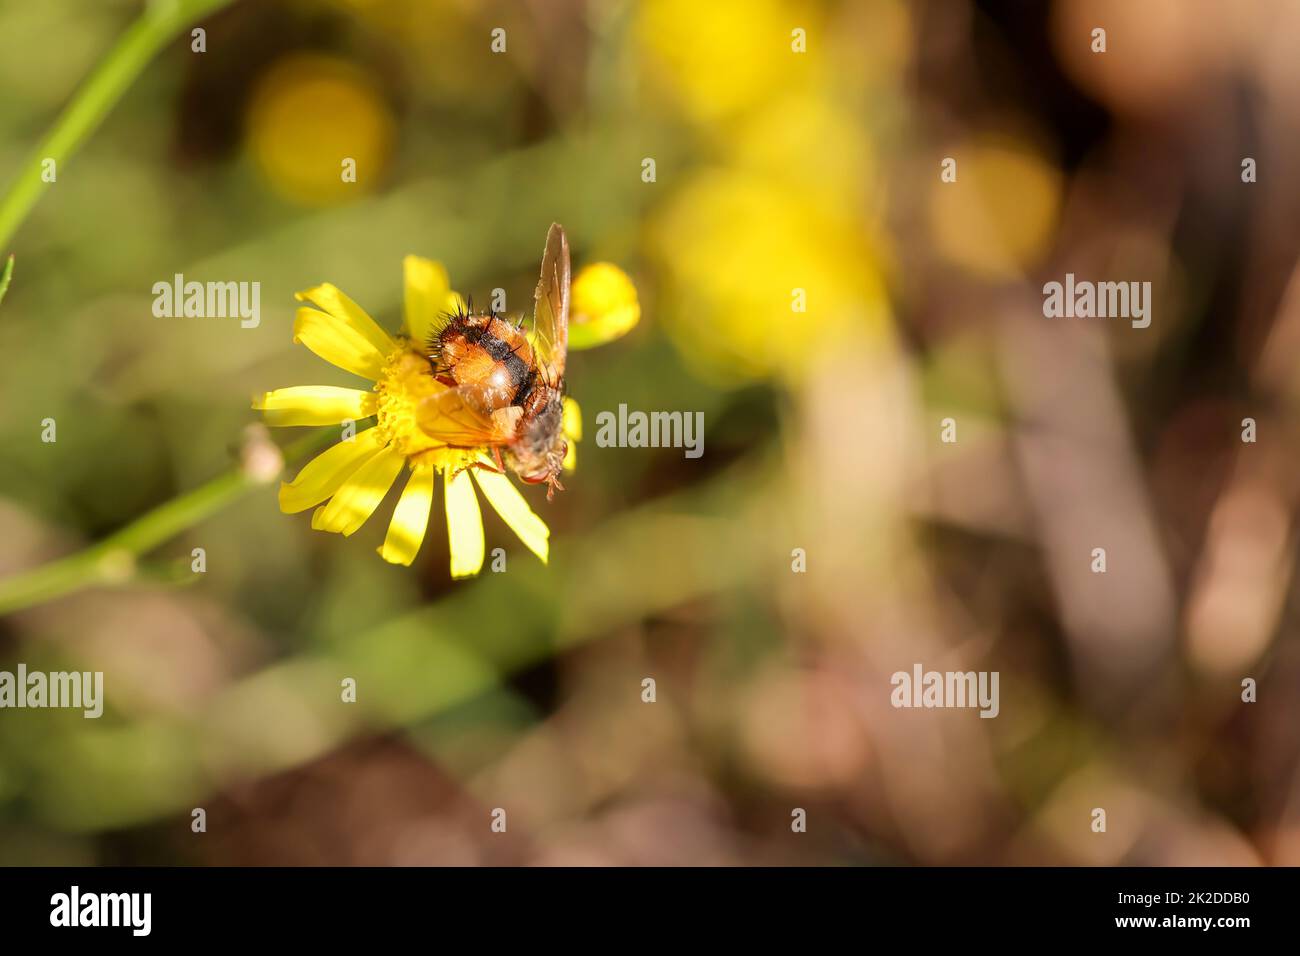 A hoverfly on a yellow flowering plant. Stock Photo